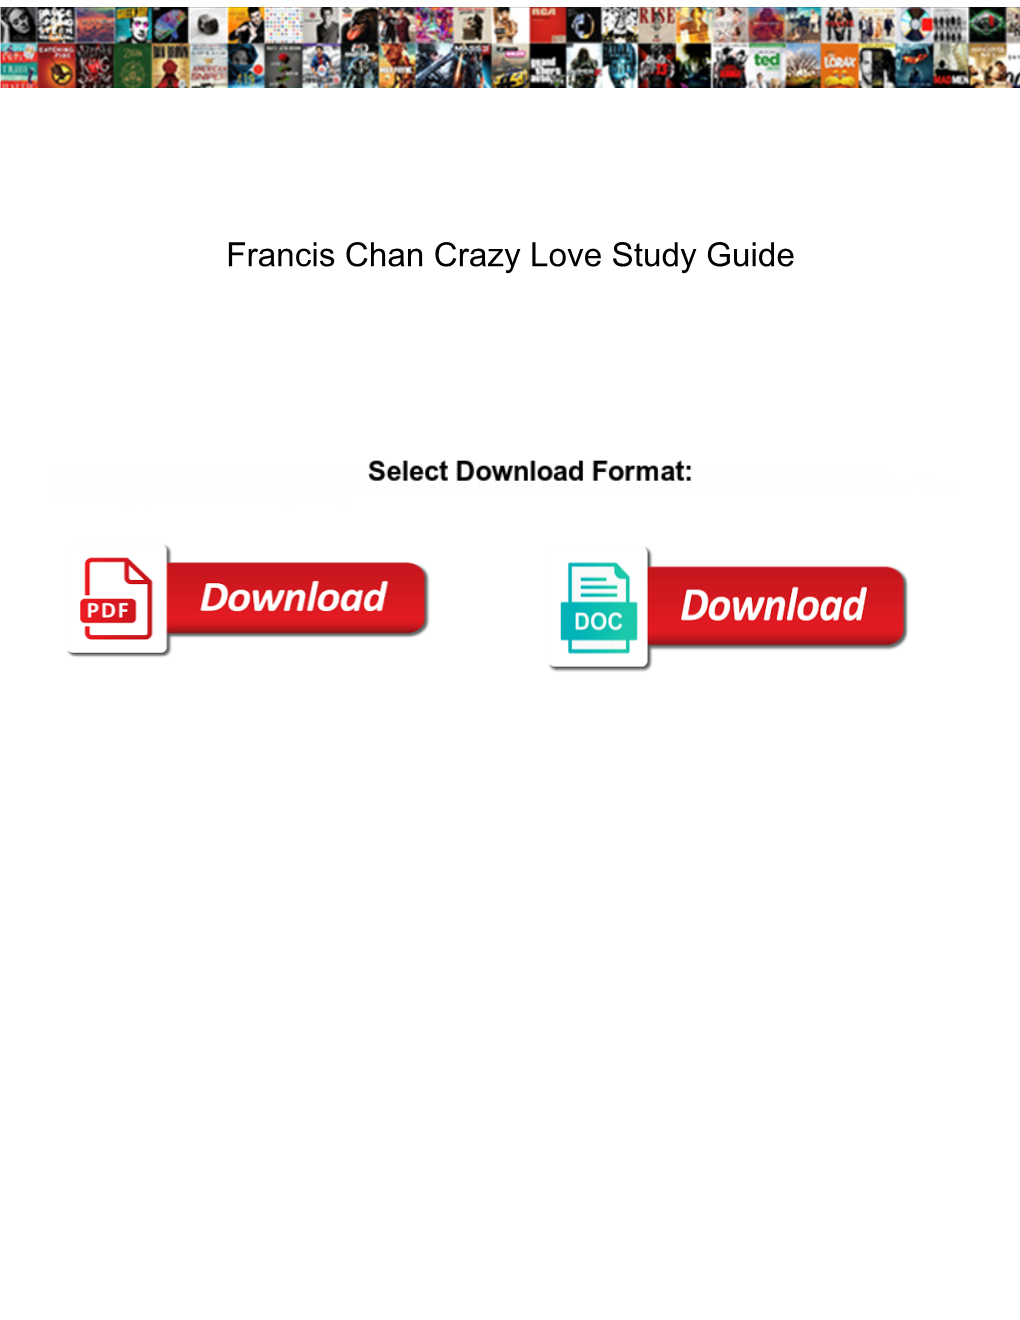 Francis Chan Crazy Love Study Guide